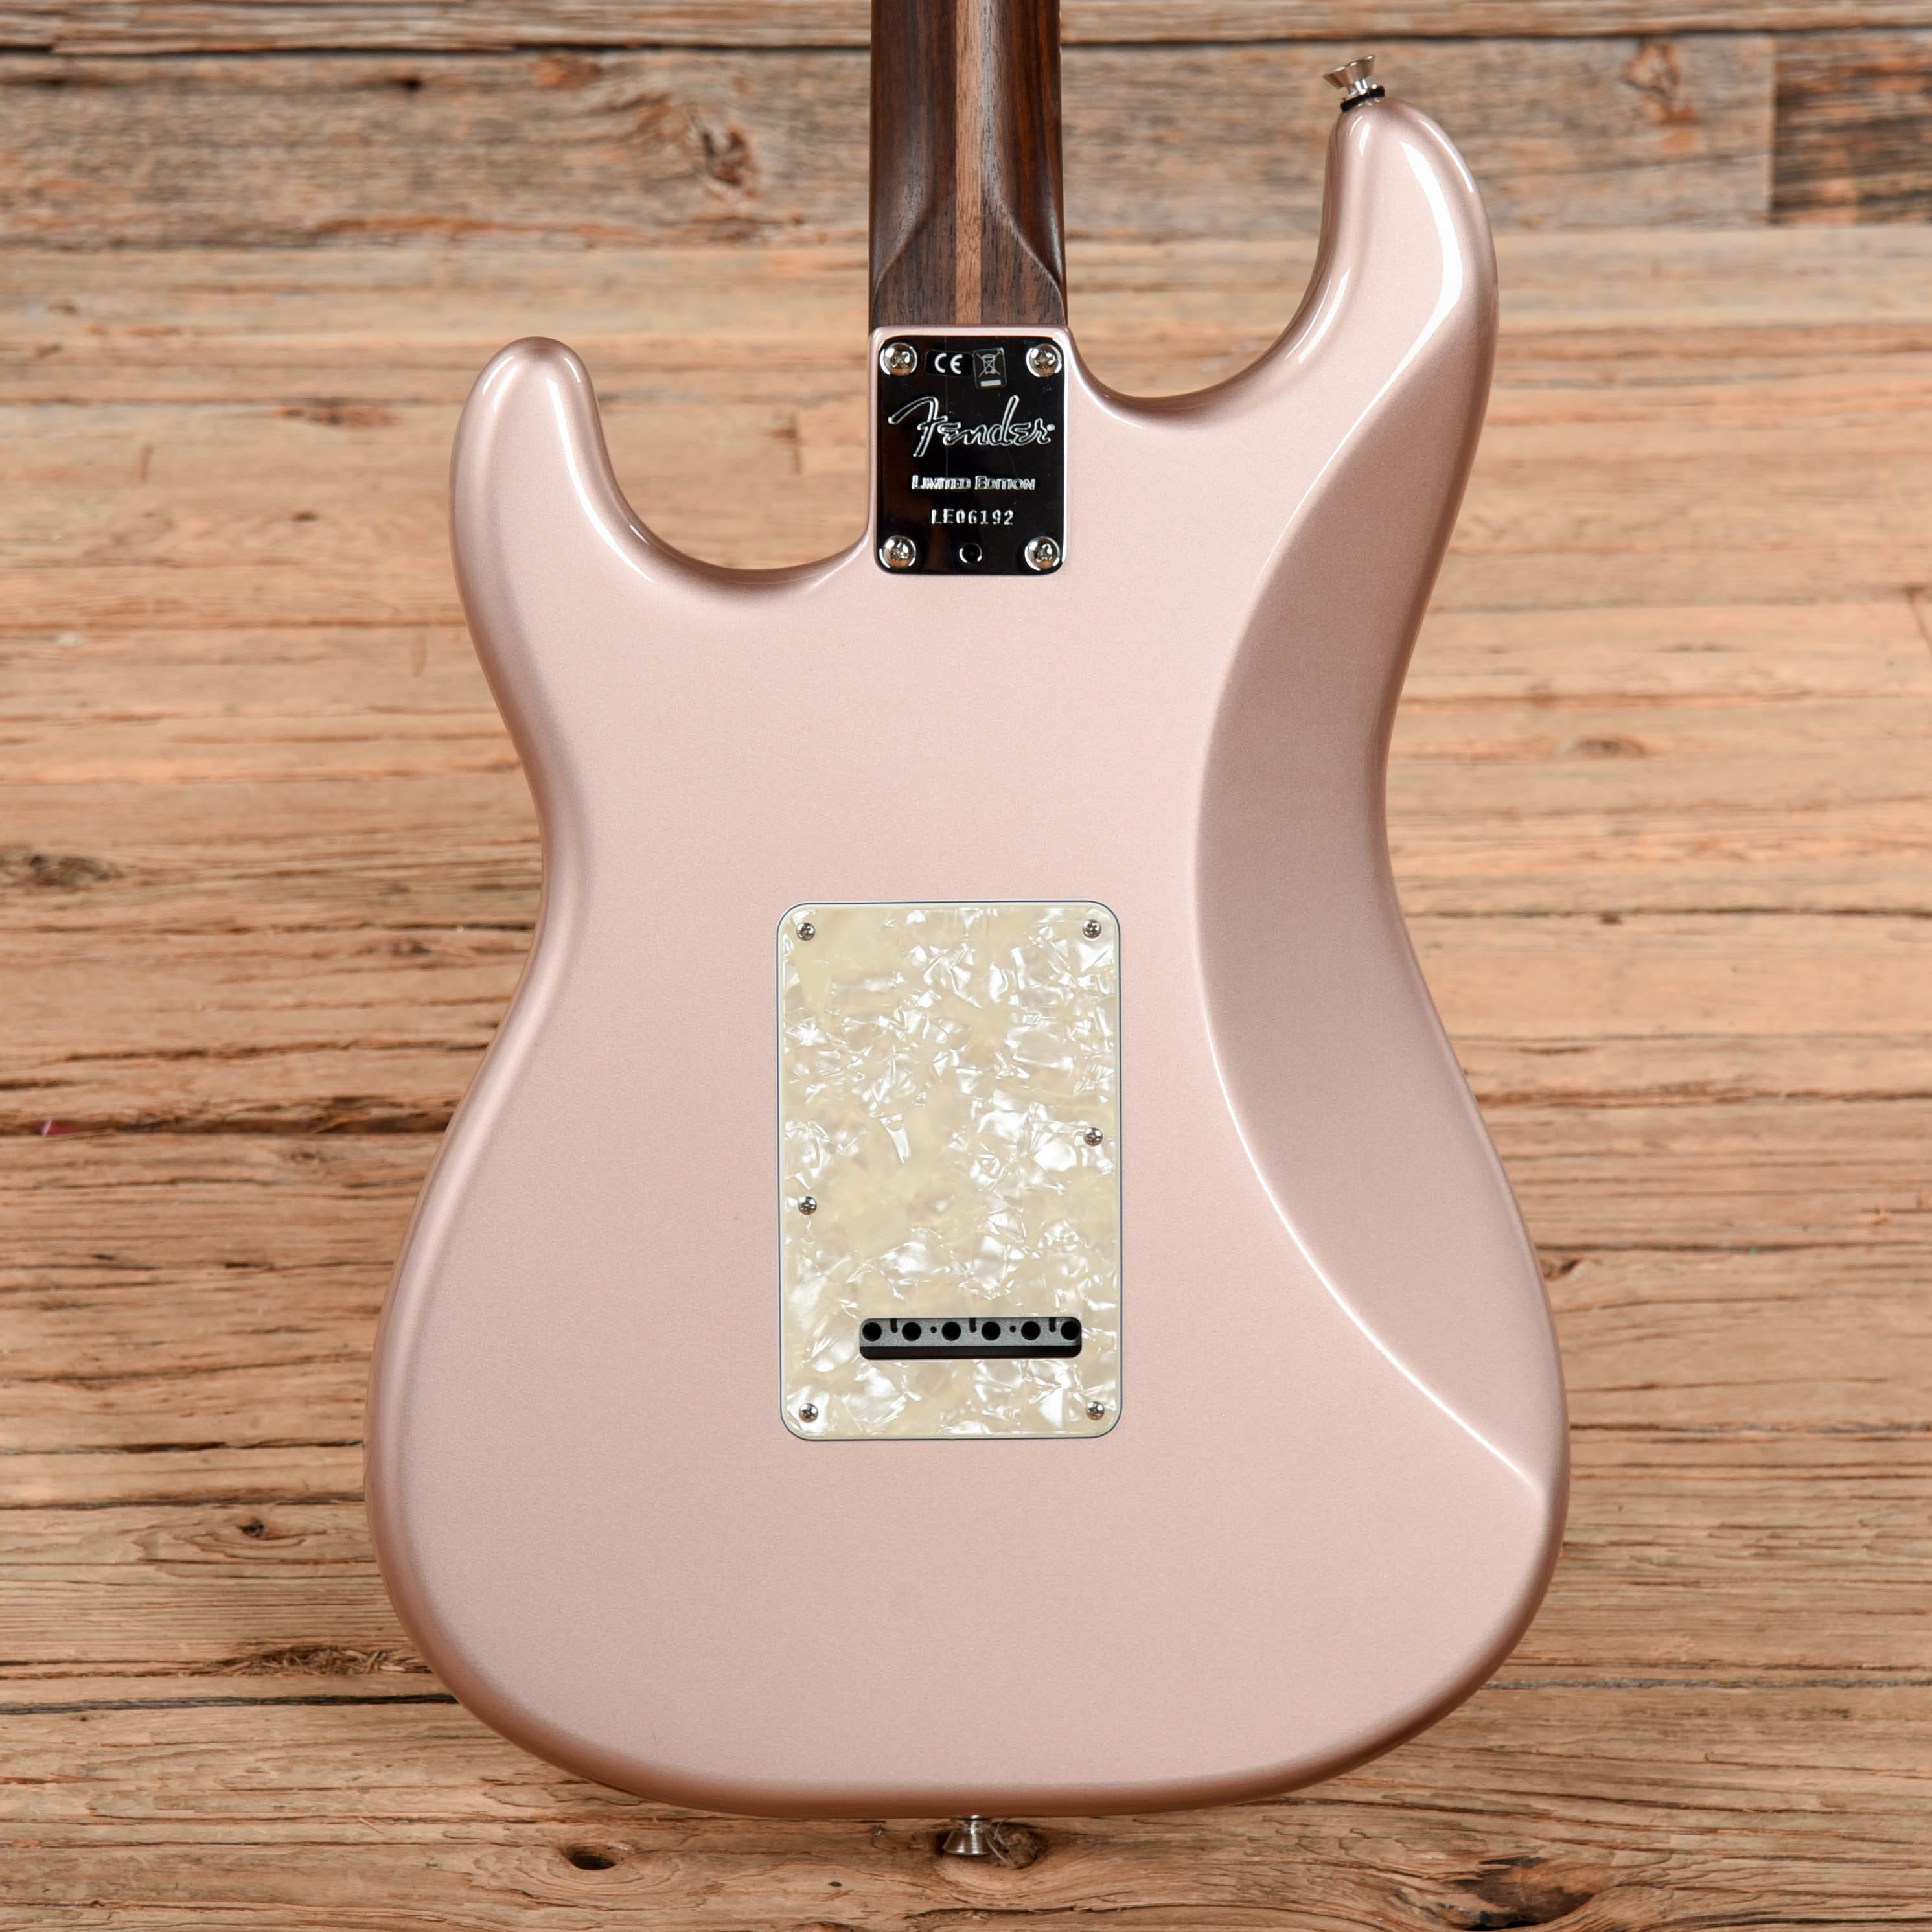 Fender American Professional Stratocaster HSS Limited Edition Rosewood Neck Rose Gold 2018 Electric Guitars / Solid Body